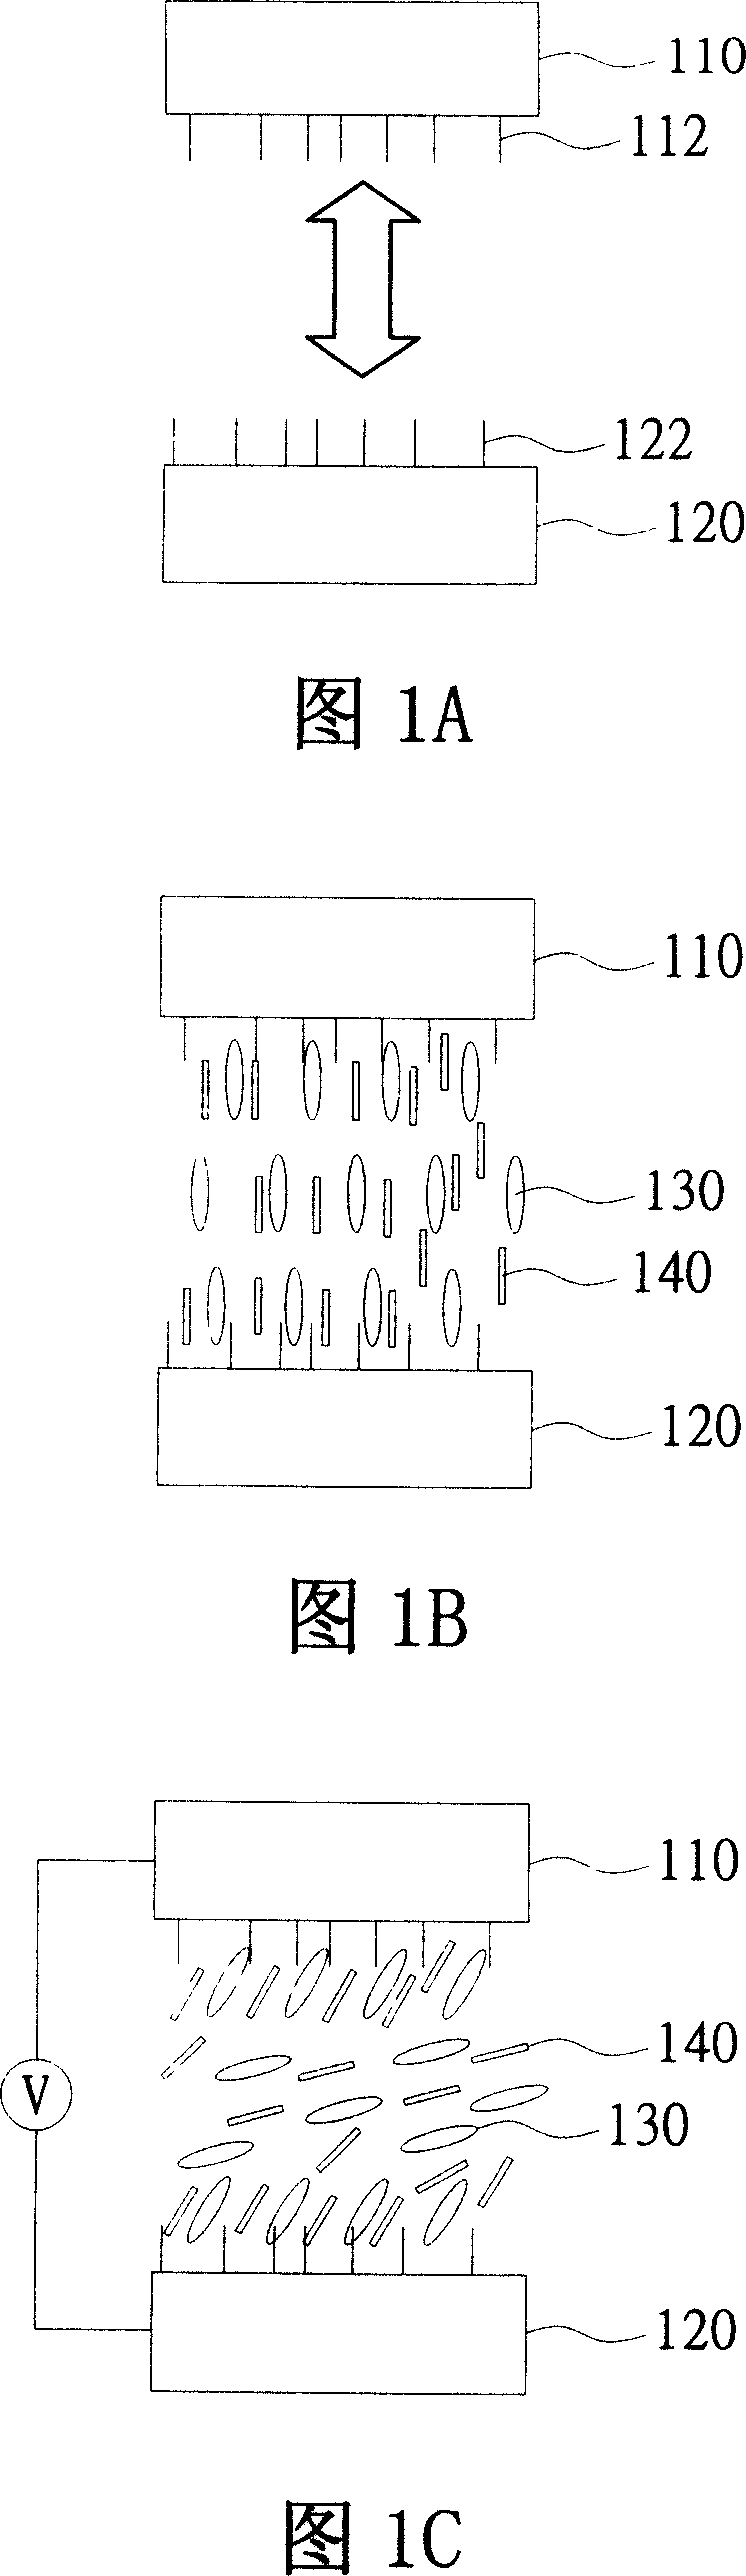 Photo-sensitive monomer, liquid crystal material, liquid crystal panel and method of fabrication, photoelectric device and fabricating method thereof